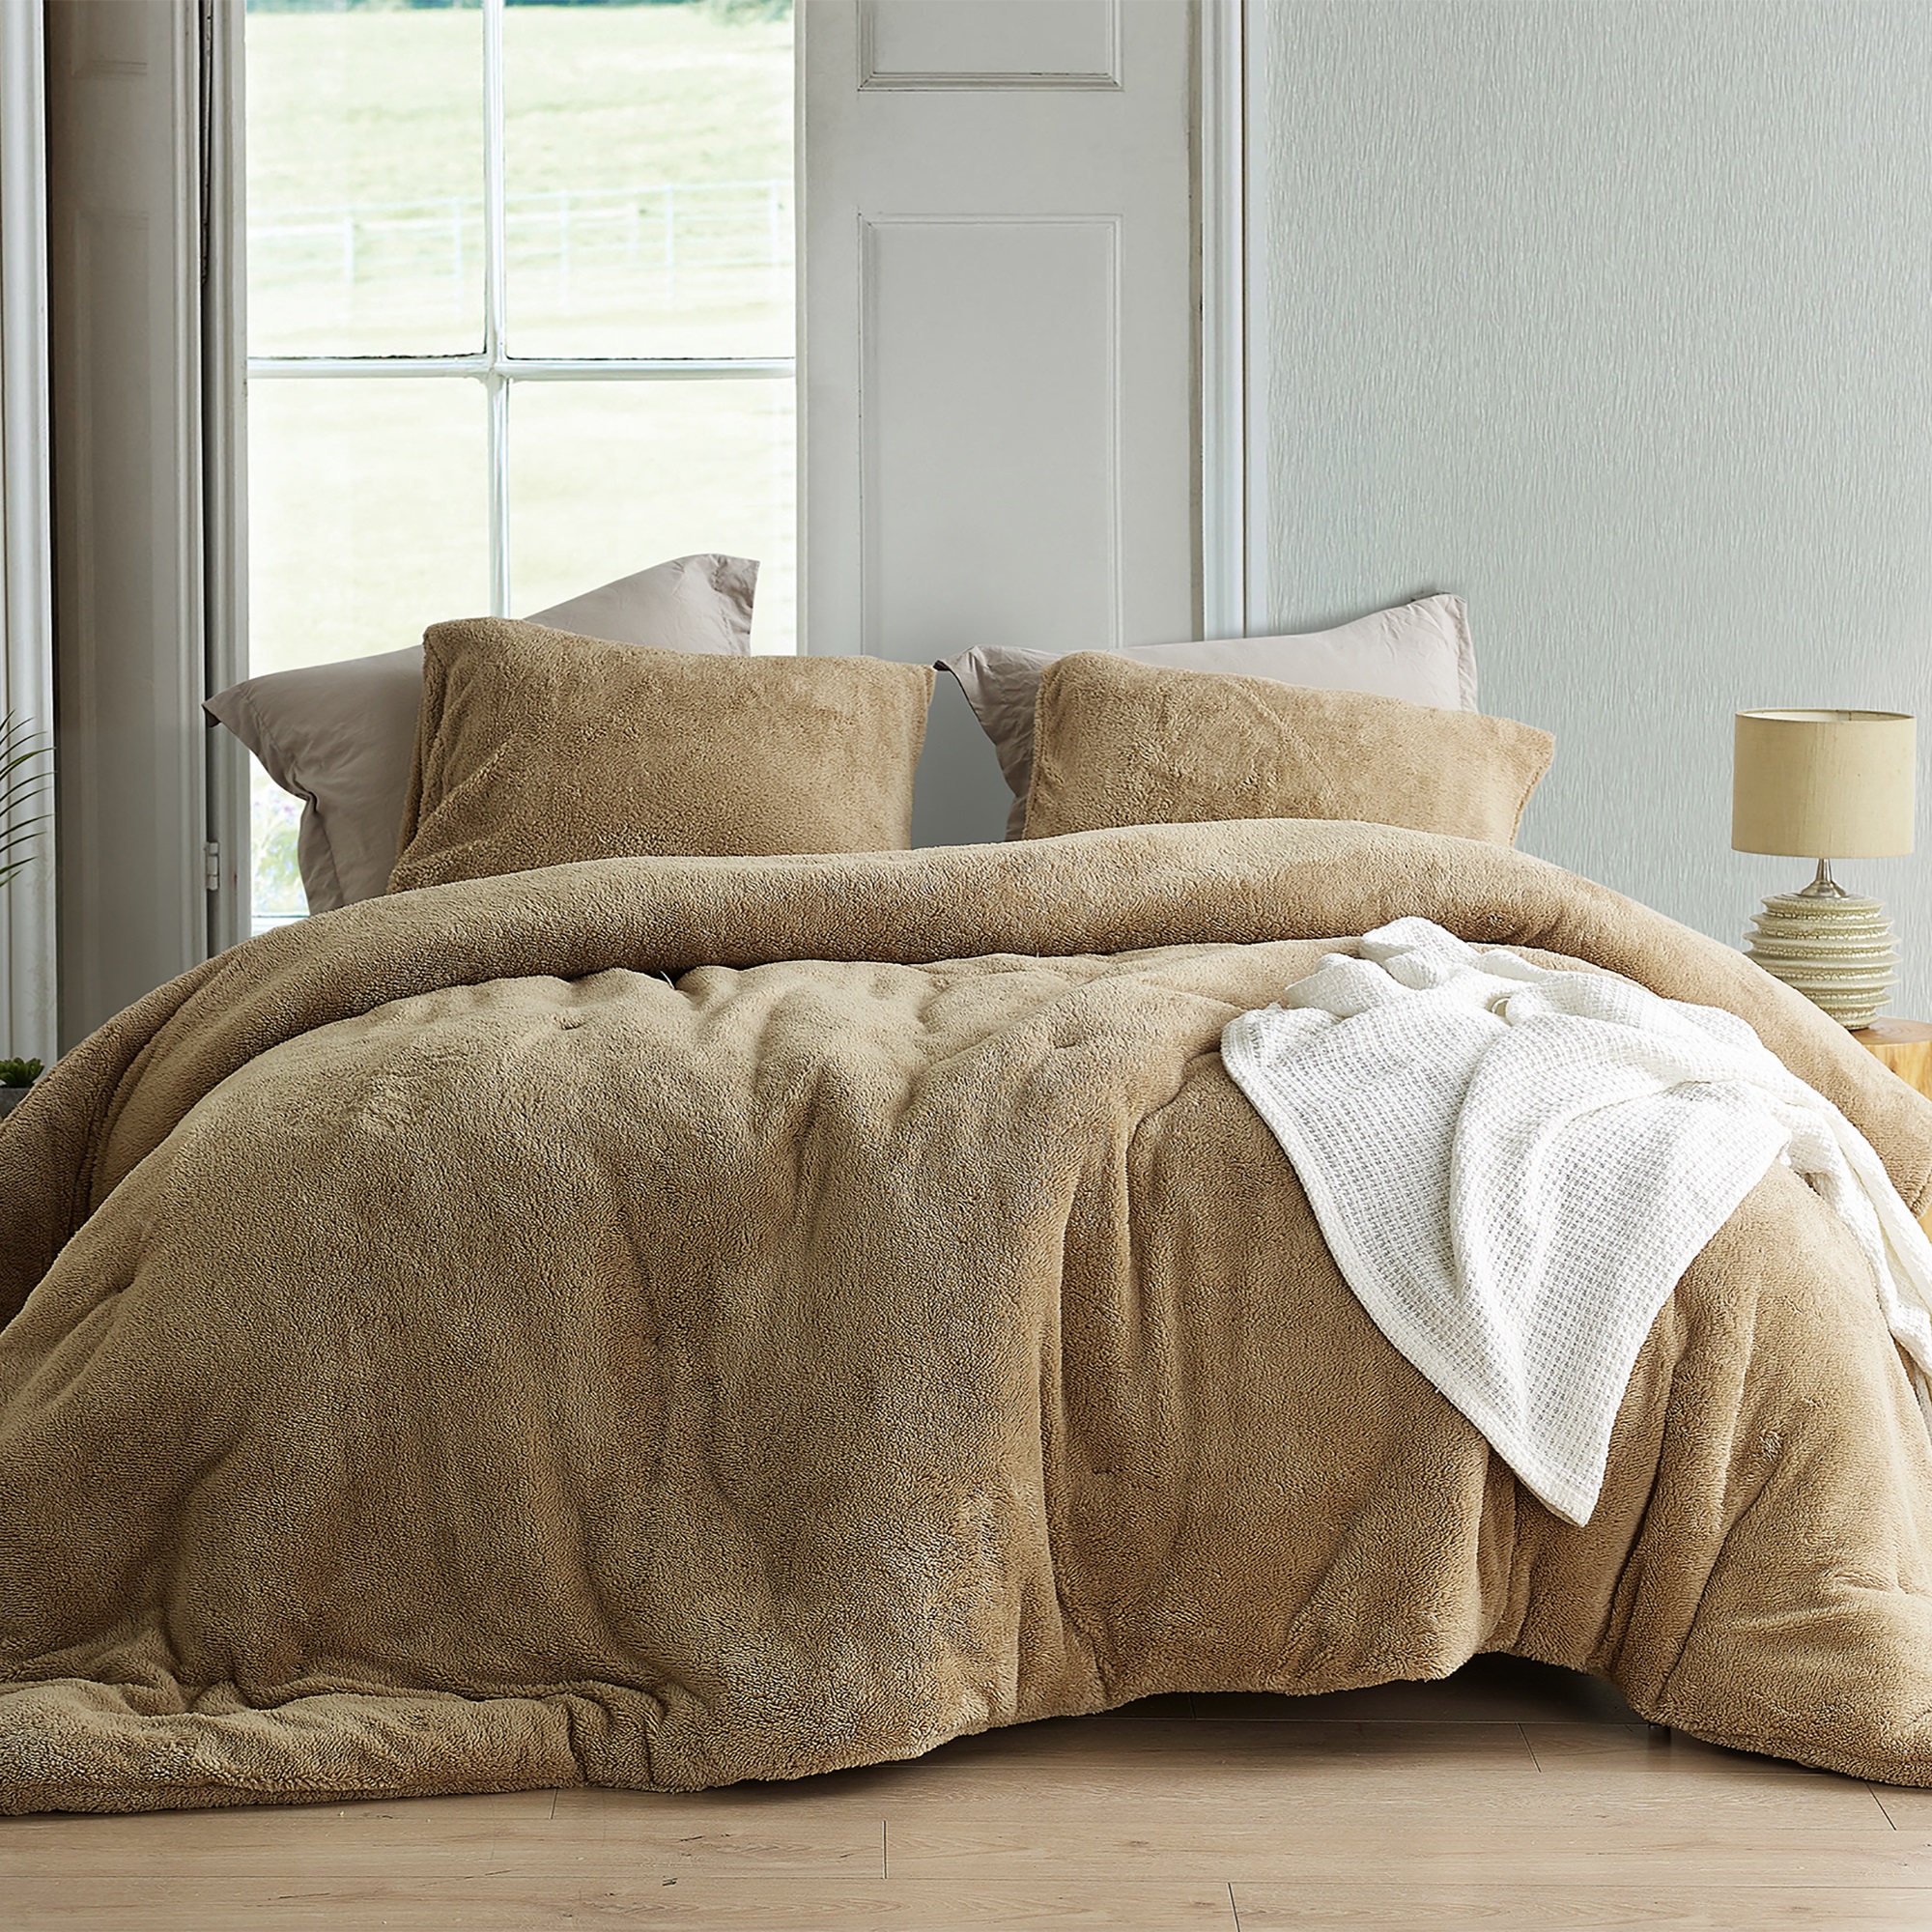 Coma Inducer Oversized Comforter - Teddy Bear - Taupe Natural